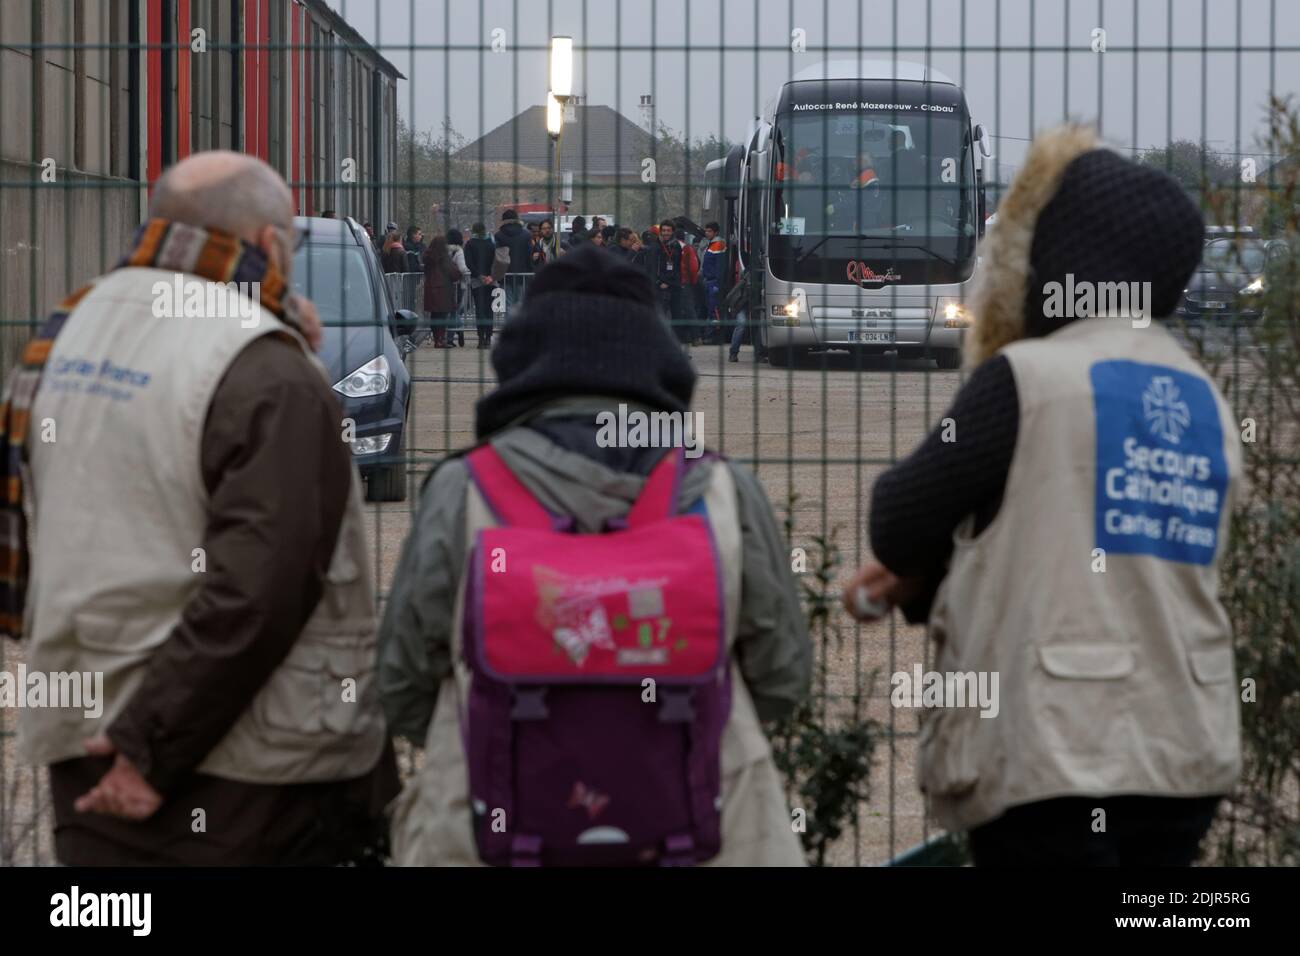 A coach carrying migrants leaves after they registered at a processing centre in 'the jungle' near Calais, northern France, as the mass exodus from the migrant camp begins. Calais, France, Monday October 24, 2016. Police vans and fire engines had gathered on the perimeter of the rat-infested slum as migrants and refugees queued in the dark to register for accommodation centres elsewhere in France after being told they must leave the camp or risk arrest and deportation. Photo by Sylvain Lefevre/ABACAPRESS.COM Stock Photo